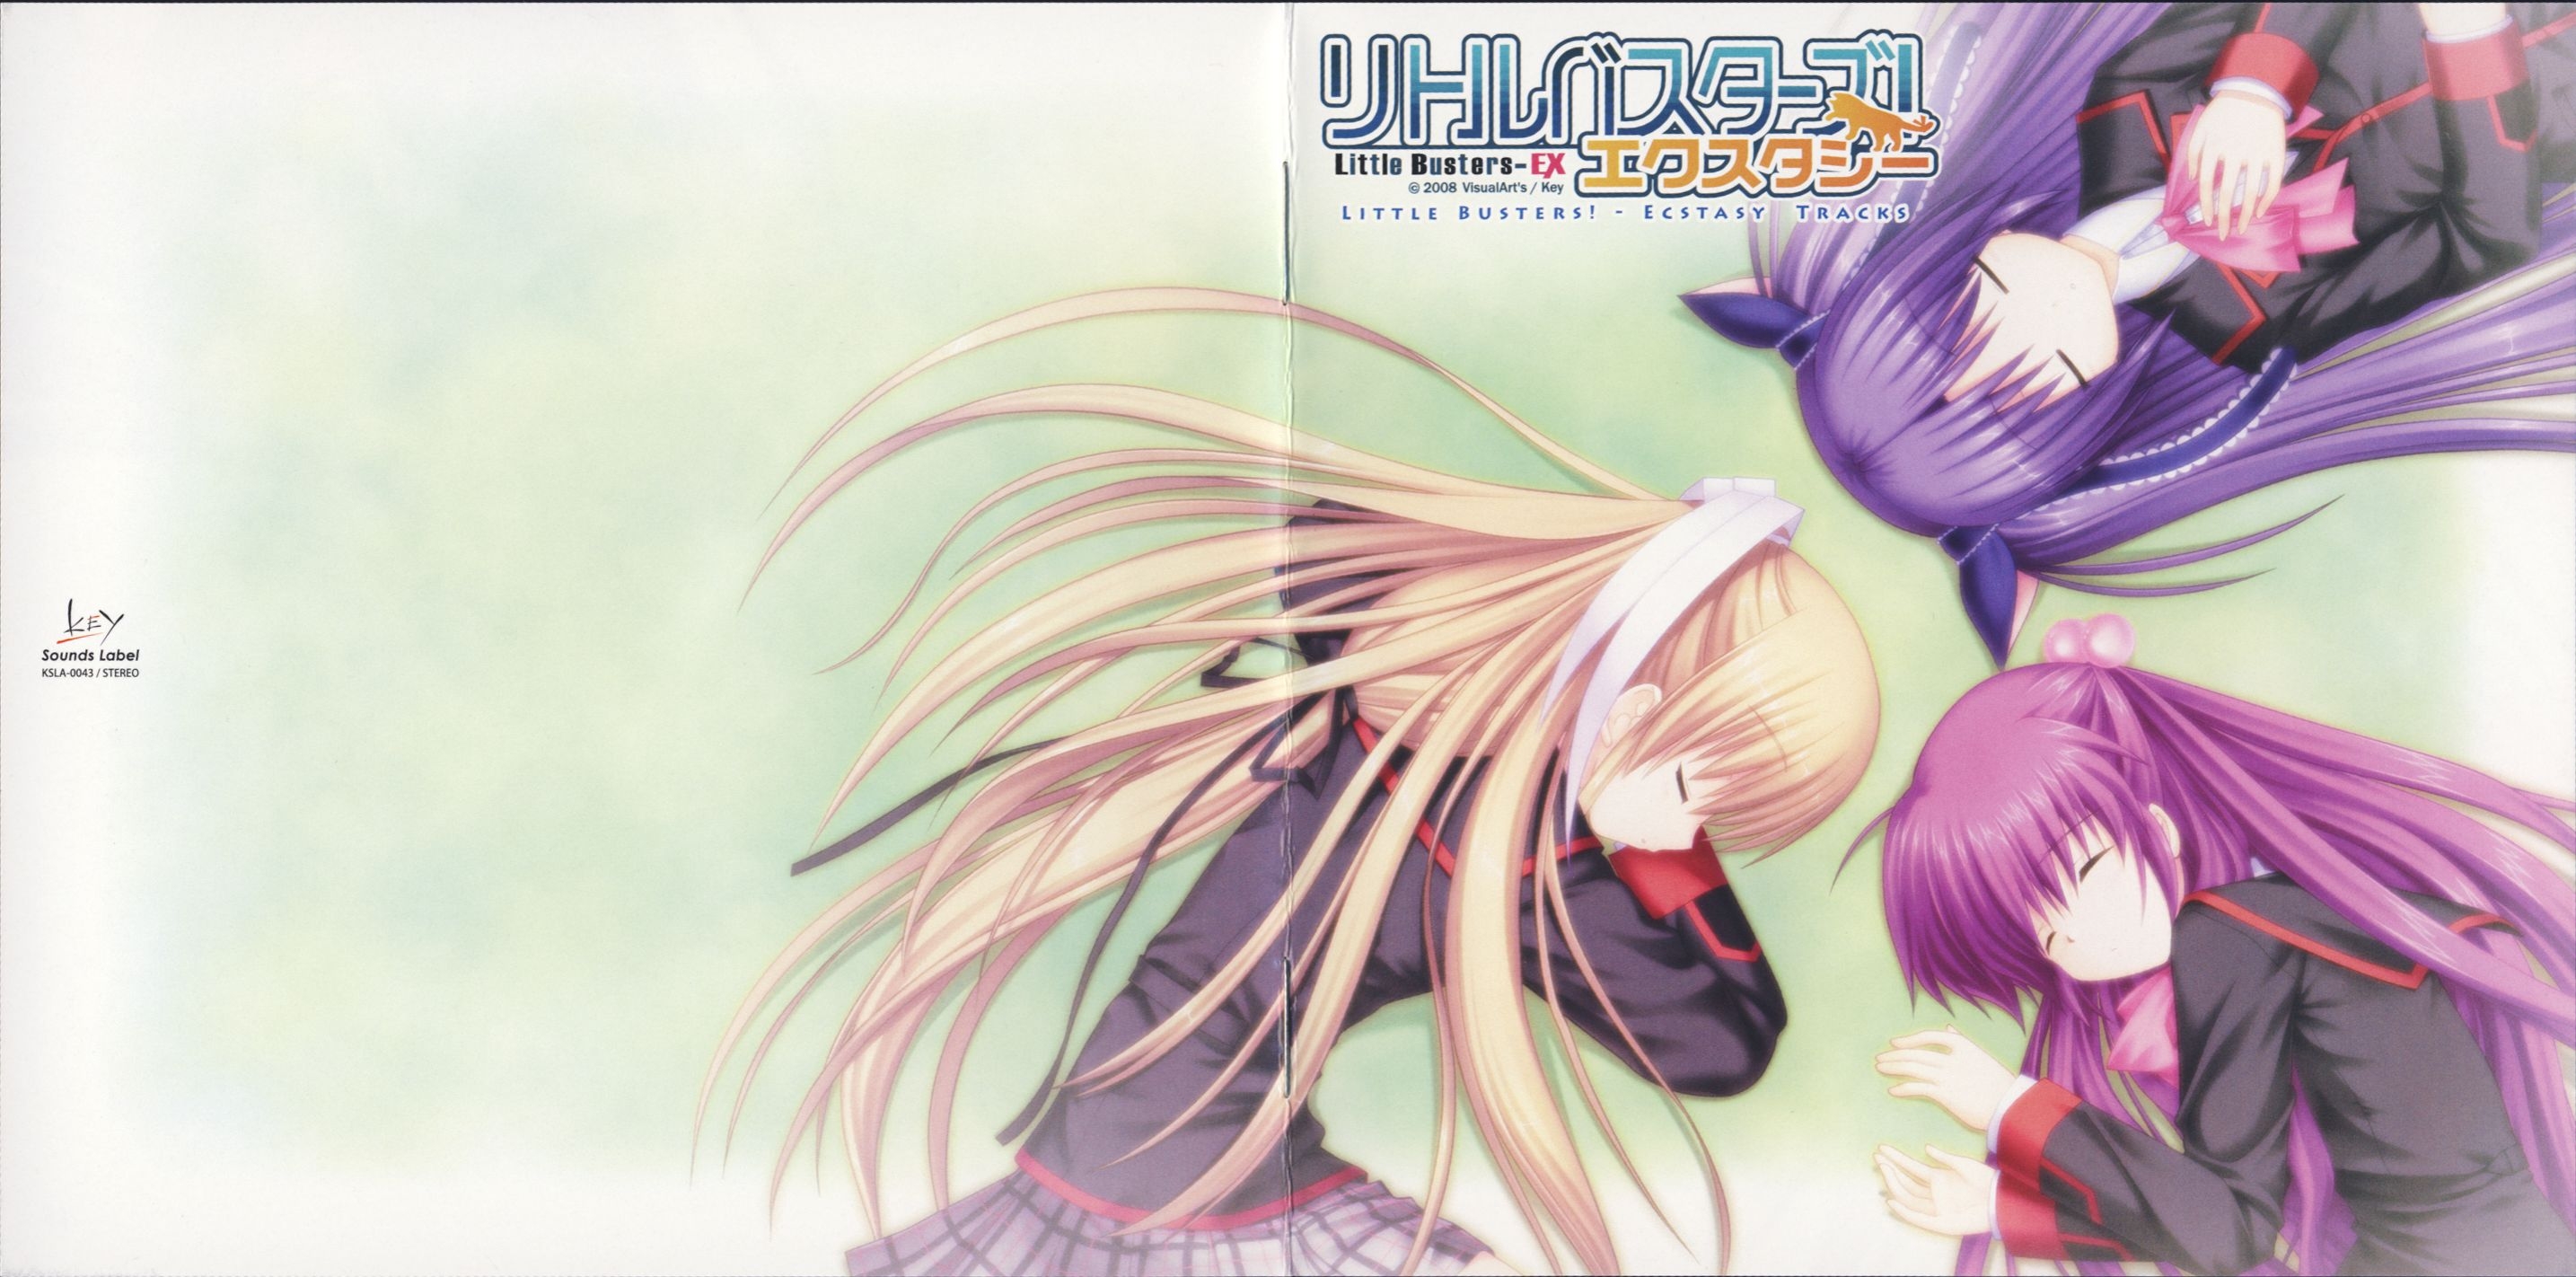 Little Busters! Ecstasy Tracks (2008) MP3 - Download Little Busters!  Ecstasy Tracks (2008) Soundtracks for FREE!